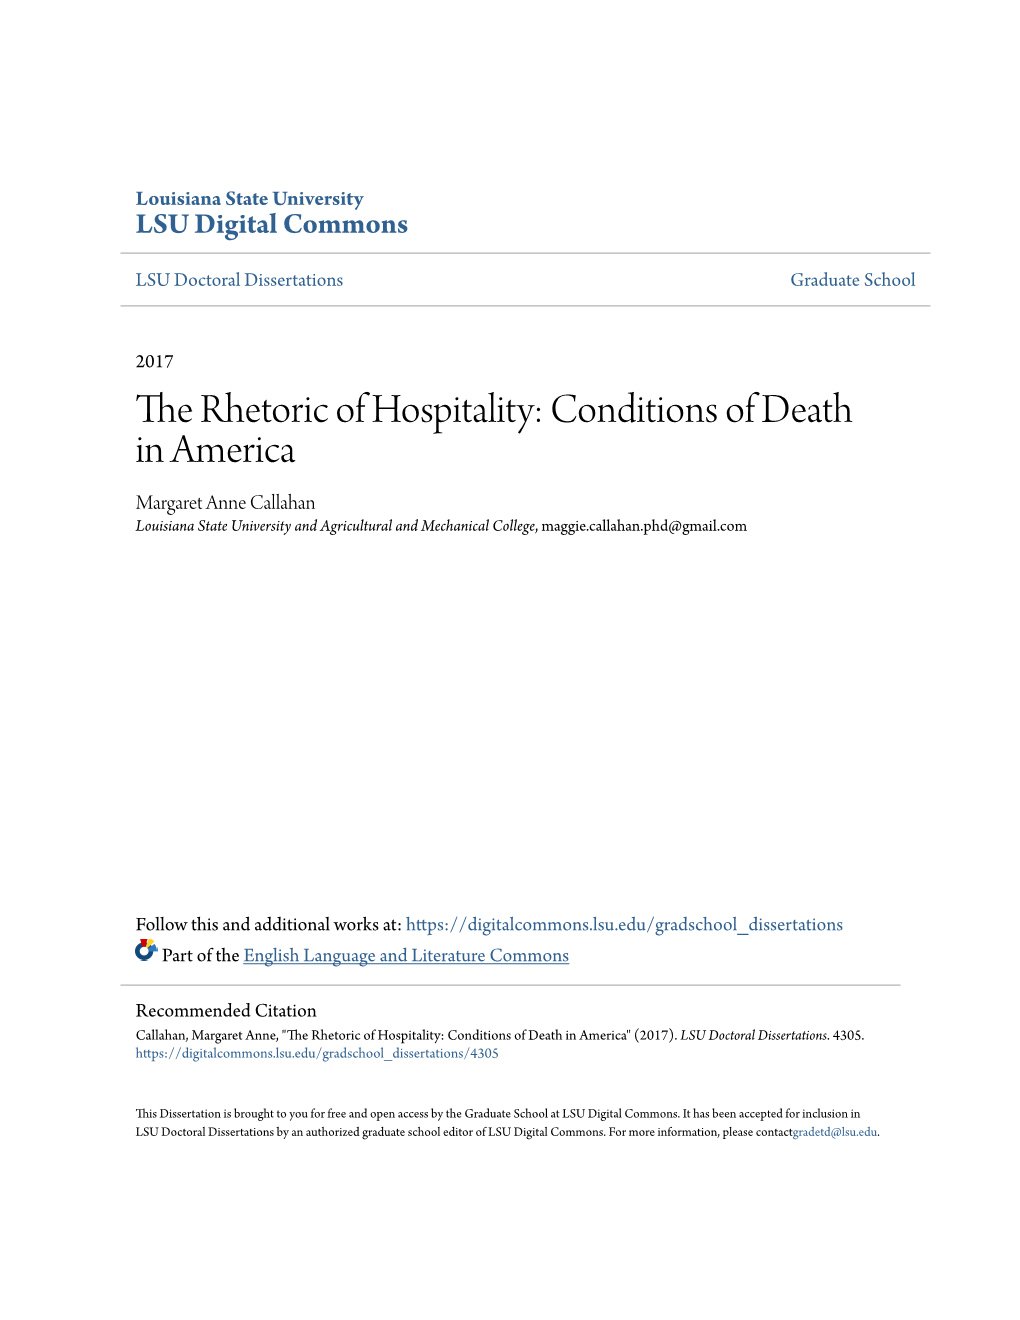 Conditions of Death in America Margaret Anne Callahan Louisiana State University and Agricultural and Mechanical College, Maggie.Callahan.Phd@Gmail.Com